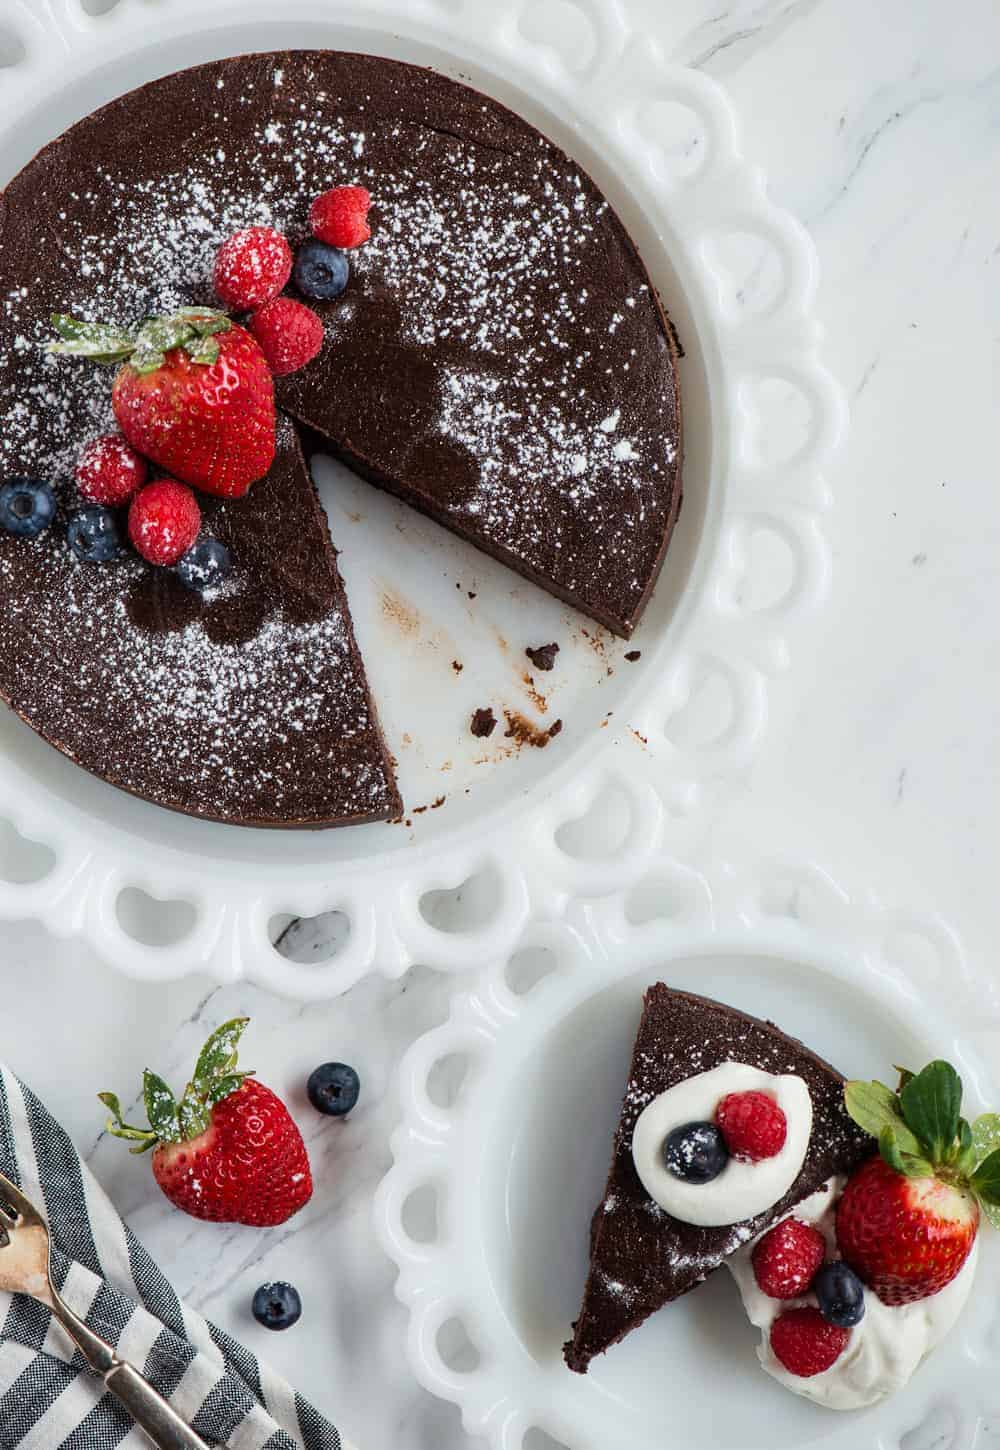 flourless chocolate cake recipe with berries and whipped cream